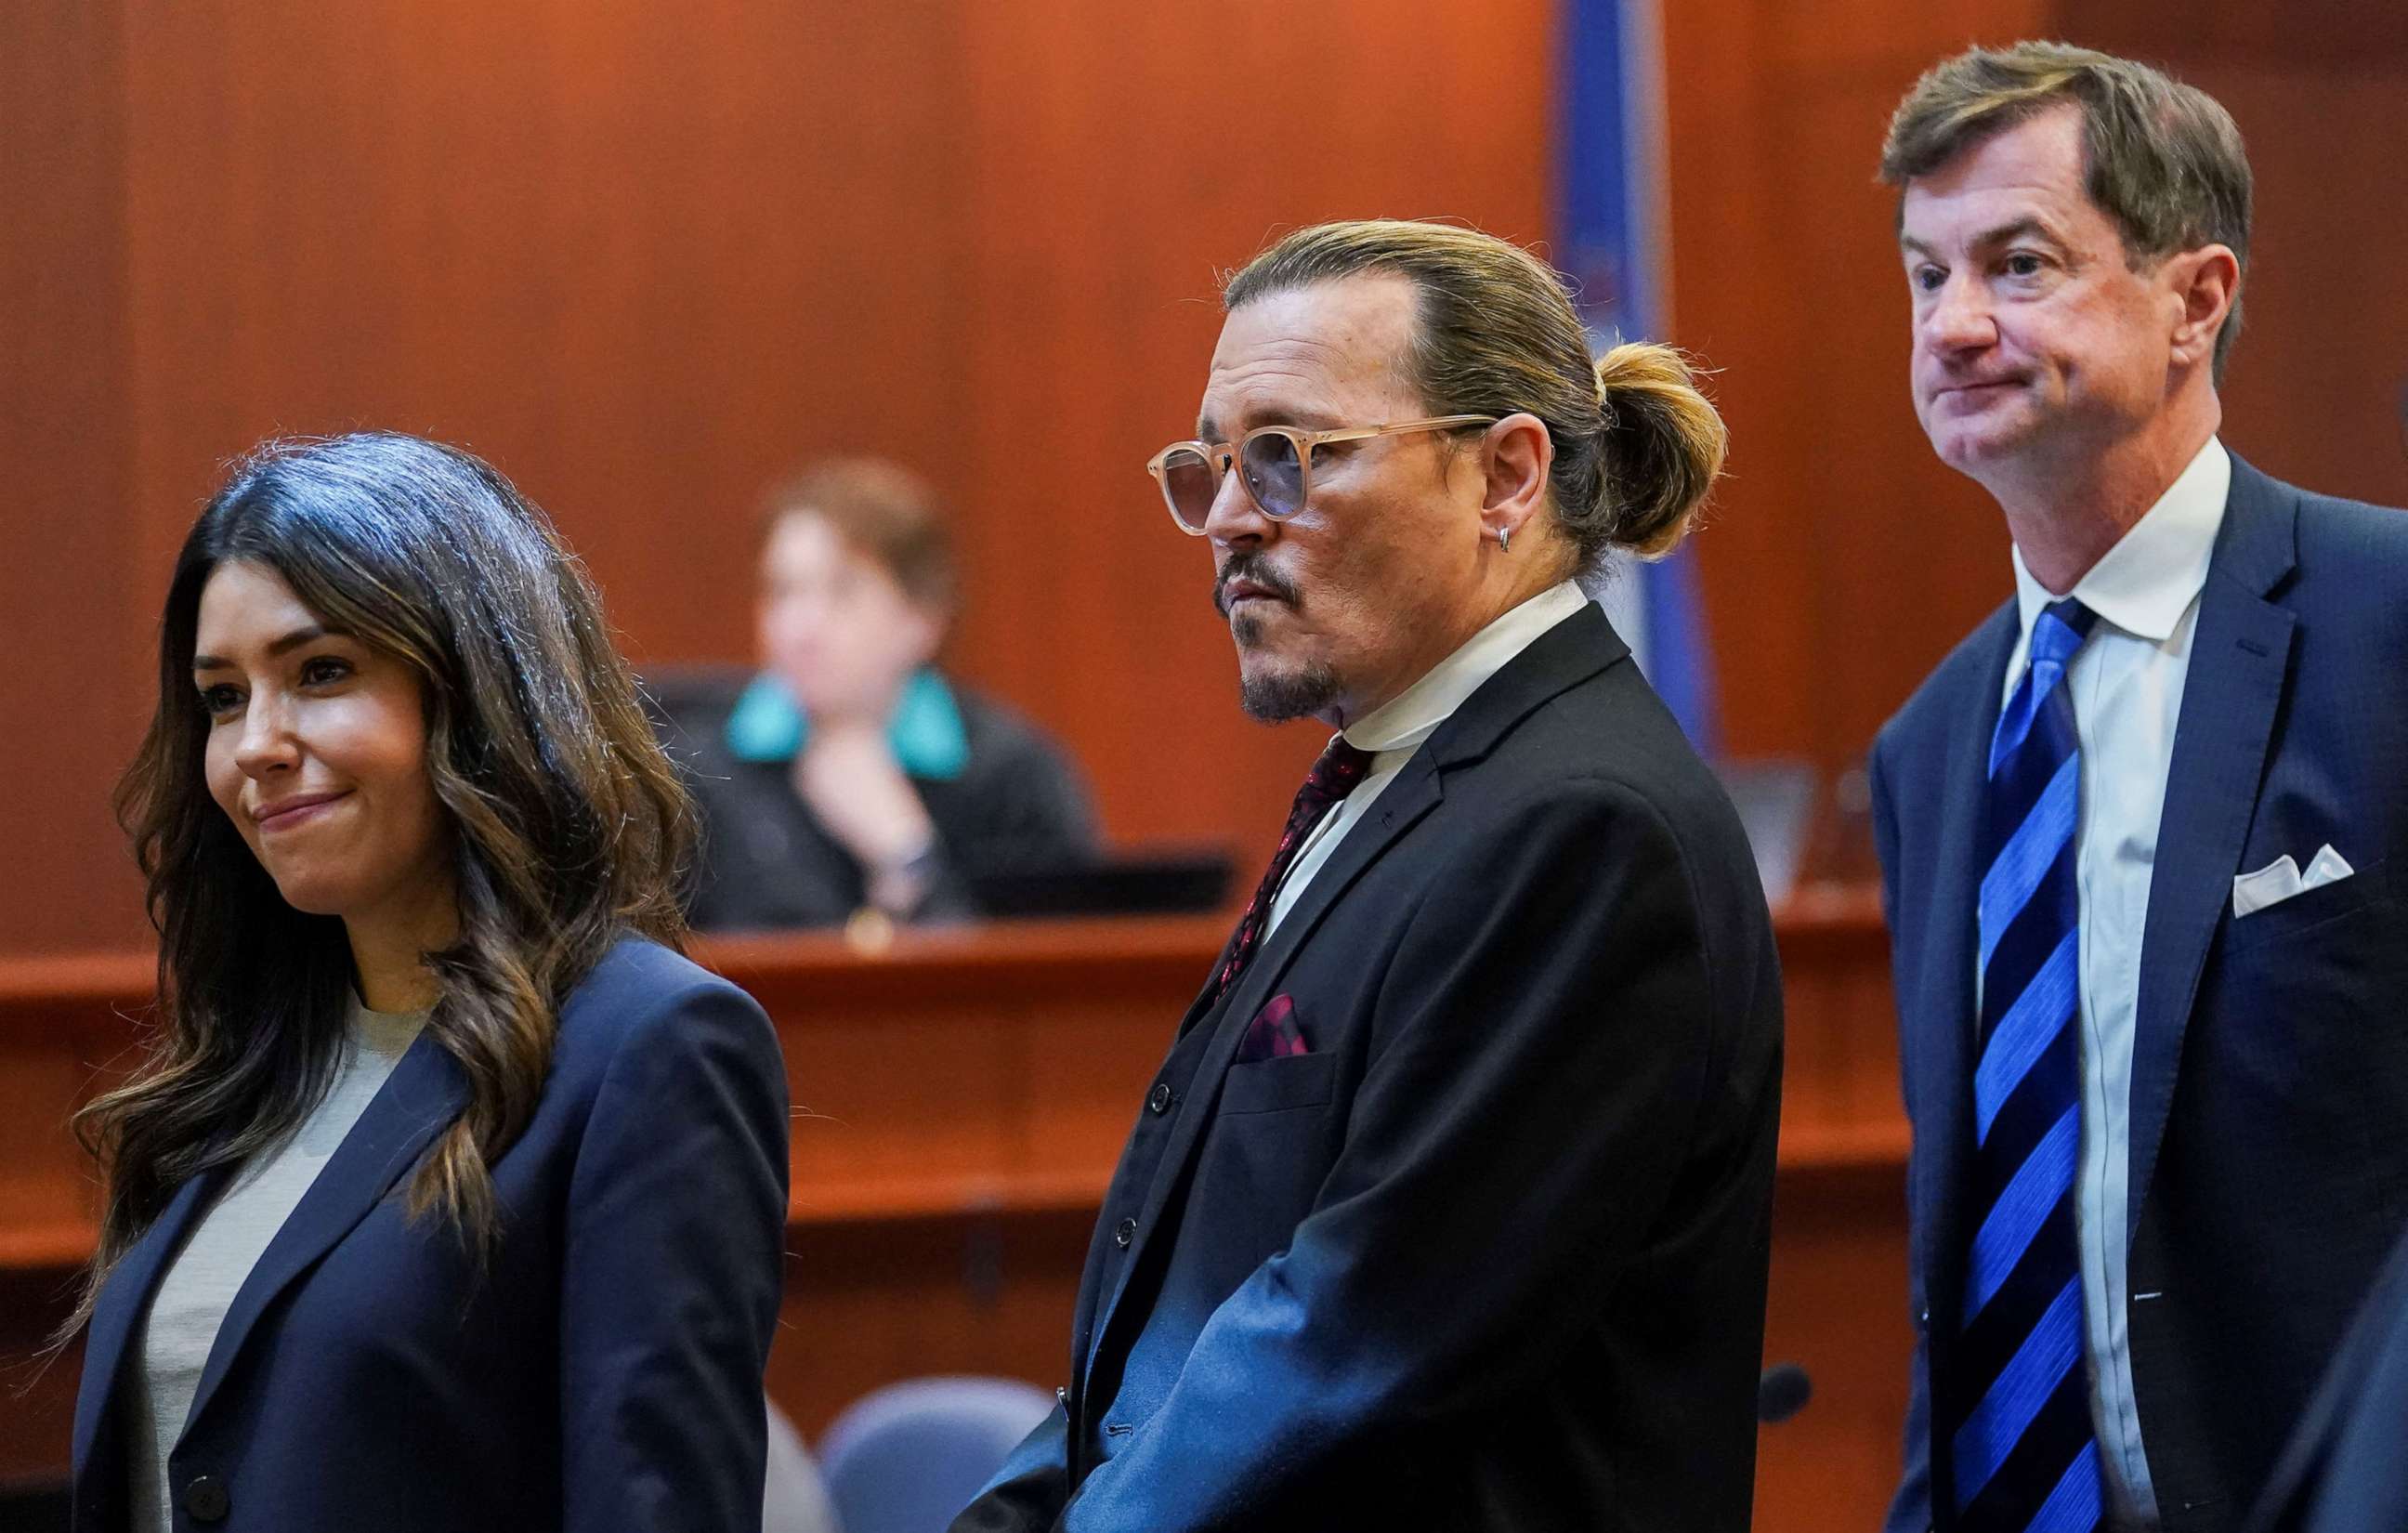 PHOTO: Actor Johnny Depp stands next to his lawyers, Camille Vasquez and Ben Chew, after a break in the defamation trial against ex-wife Amber Heard at the Fairfax County Circuit Courthouse in Fairfax, Va., on May 18, 2022.